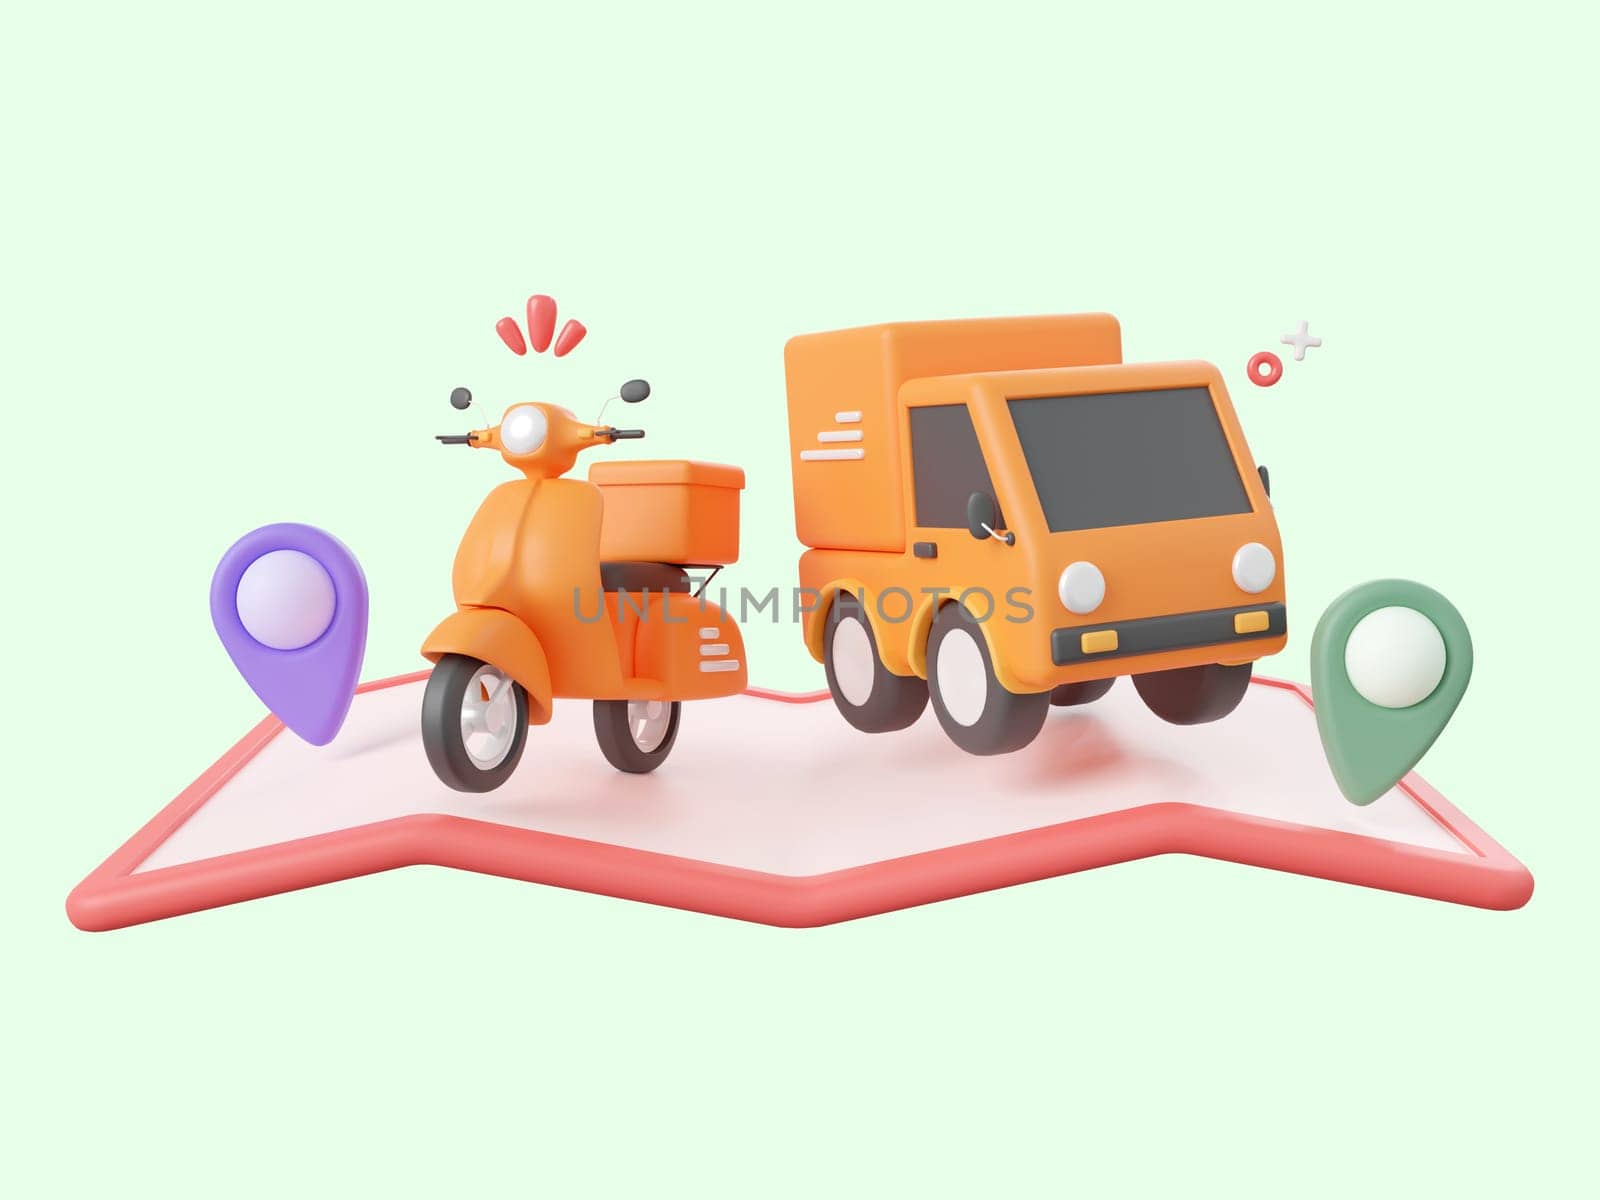 3d cartoon design illustration of Delivery service, Delivery truck and scooter with pins on map. by nutzchotwarut